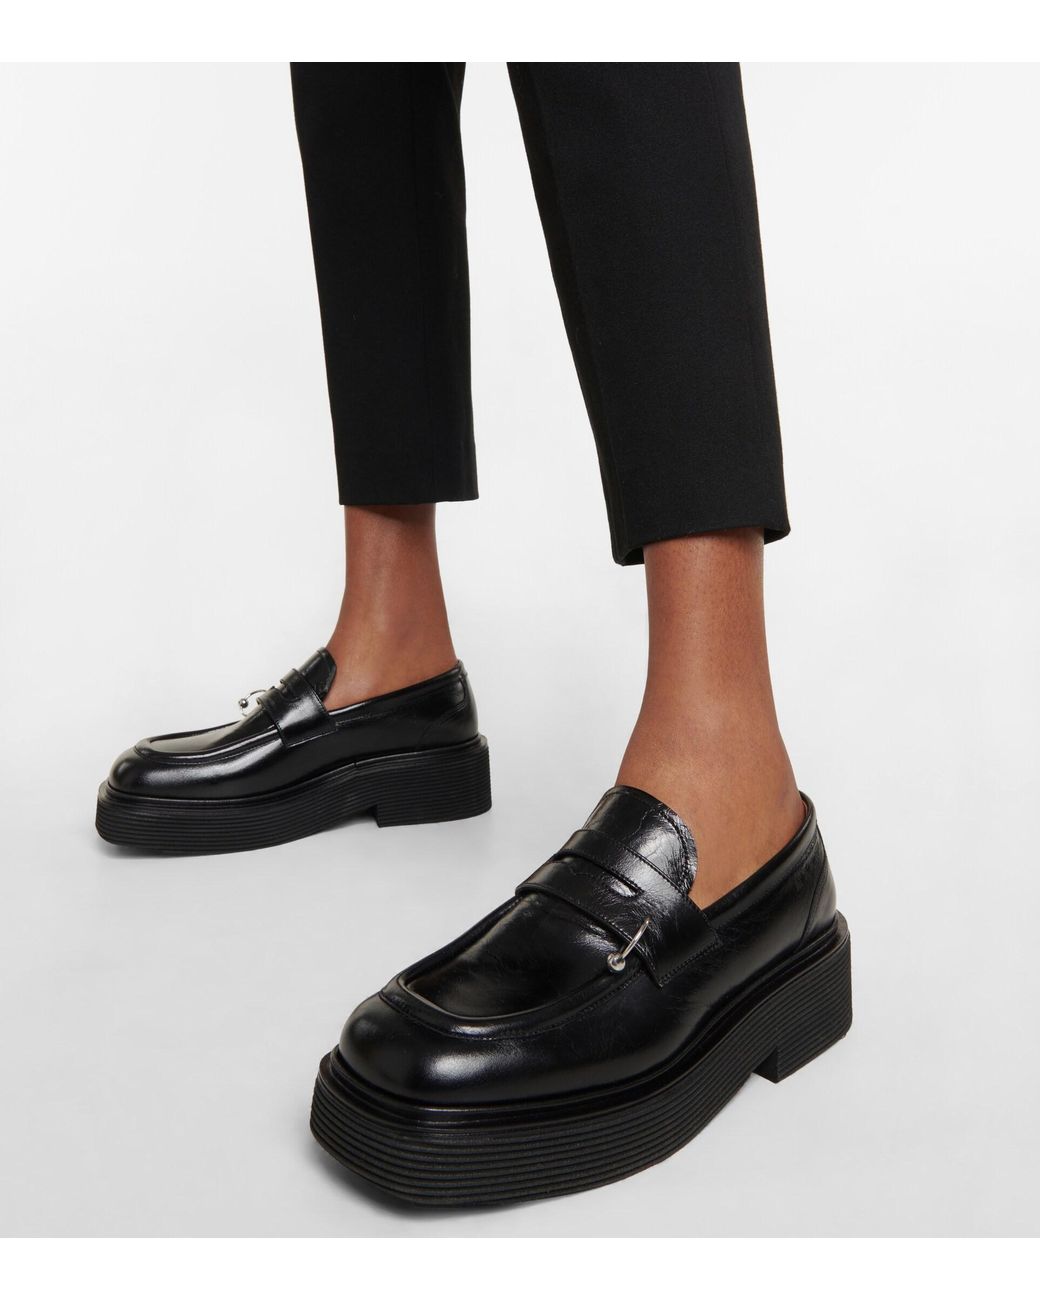 Marni Leather Platform Loafers in Black | Lyst